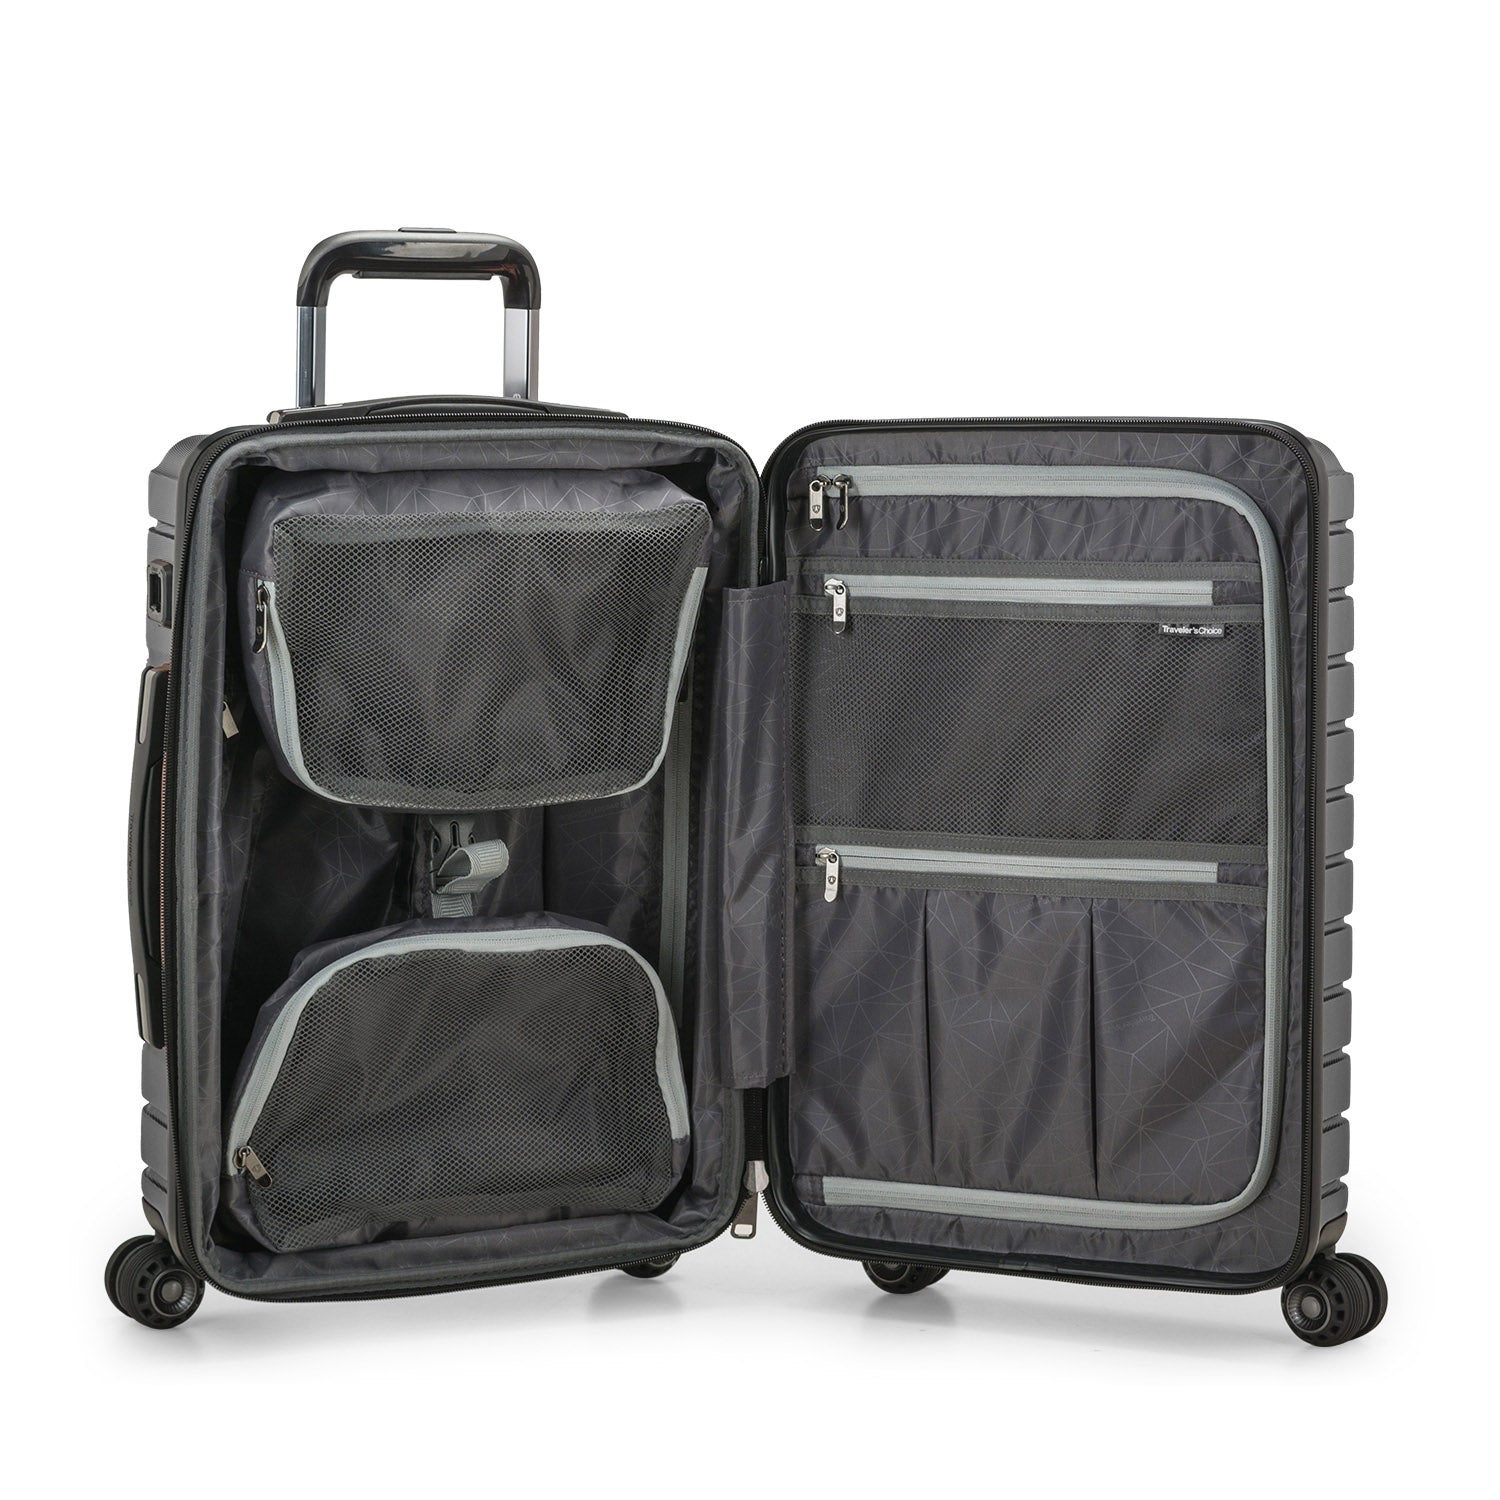 Archer Carry-On 4 Wheel Spinner Luggage Suitcase Piece w/ USB Port –  Traveler's Choice